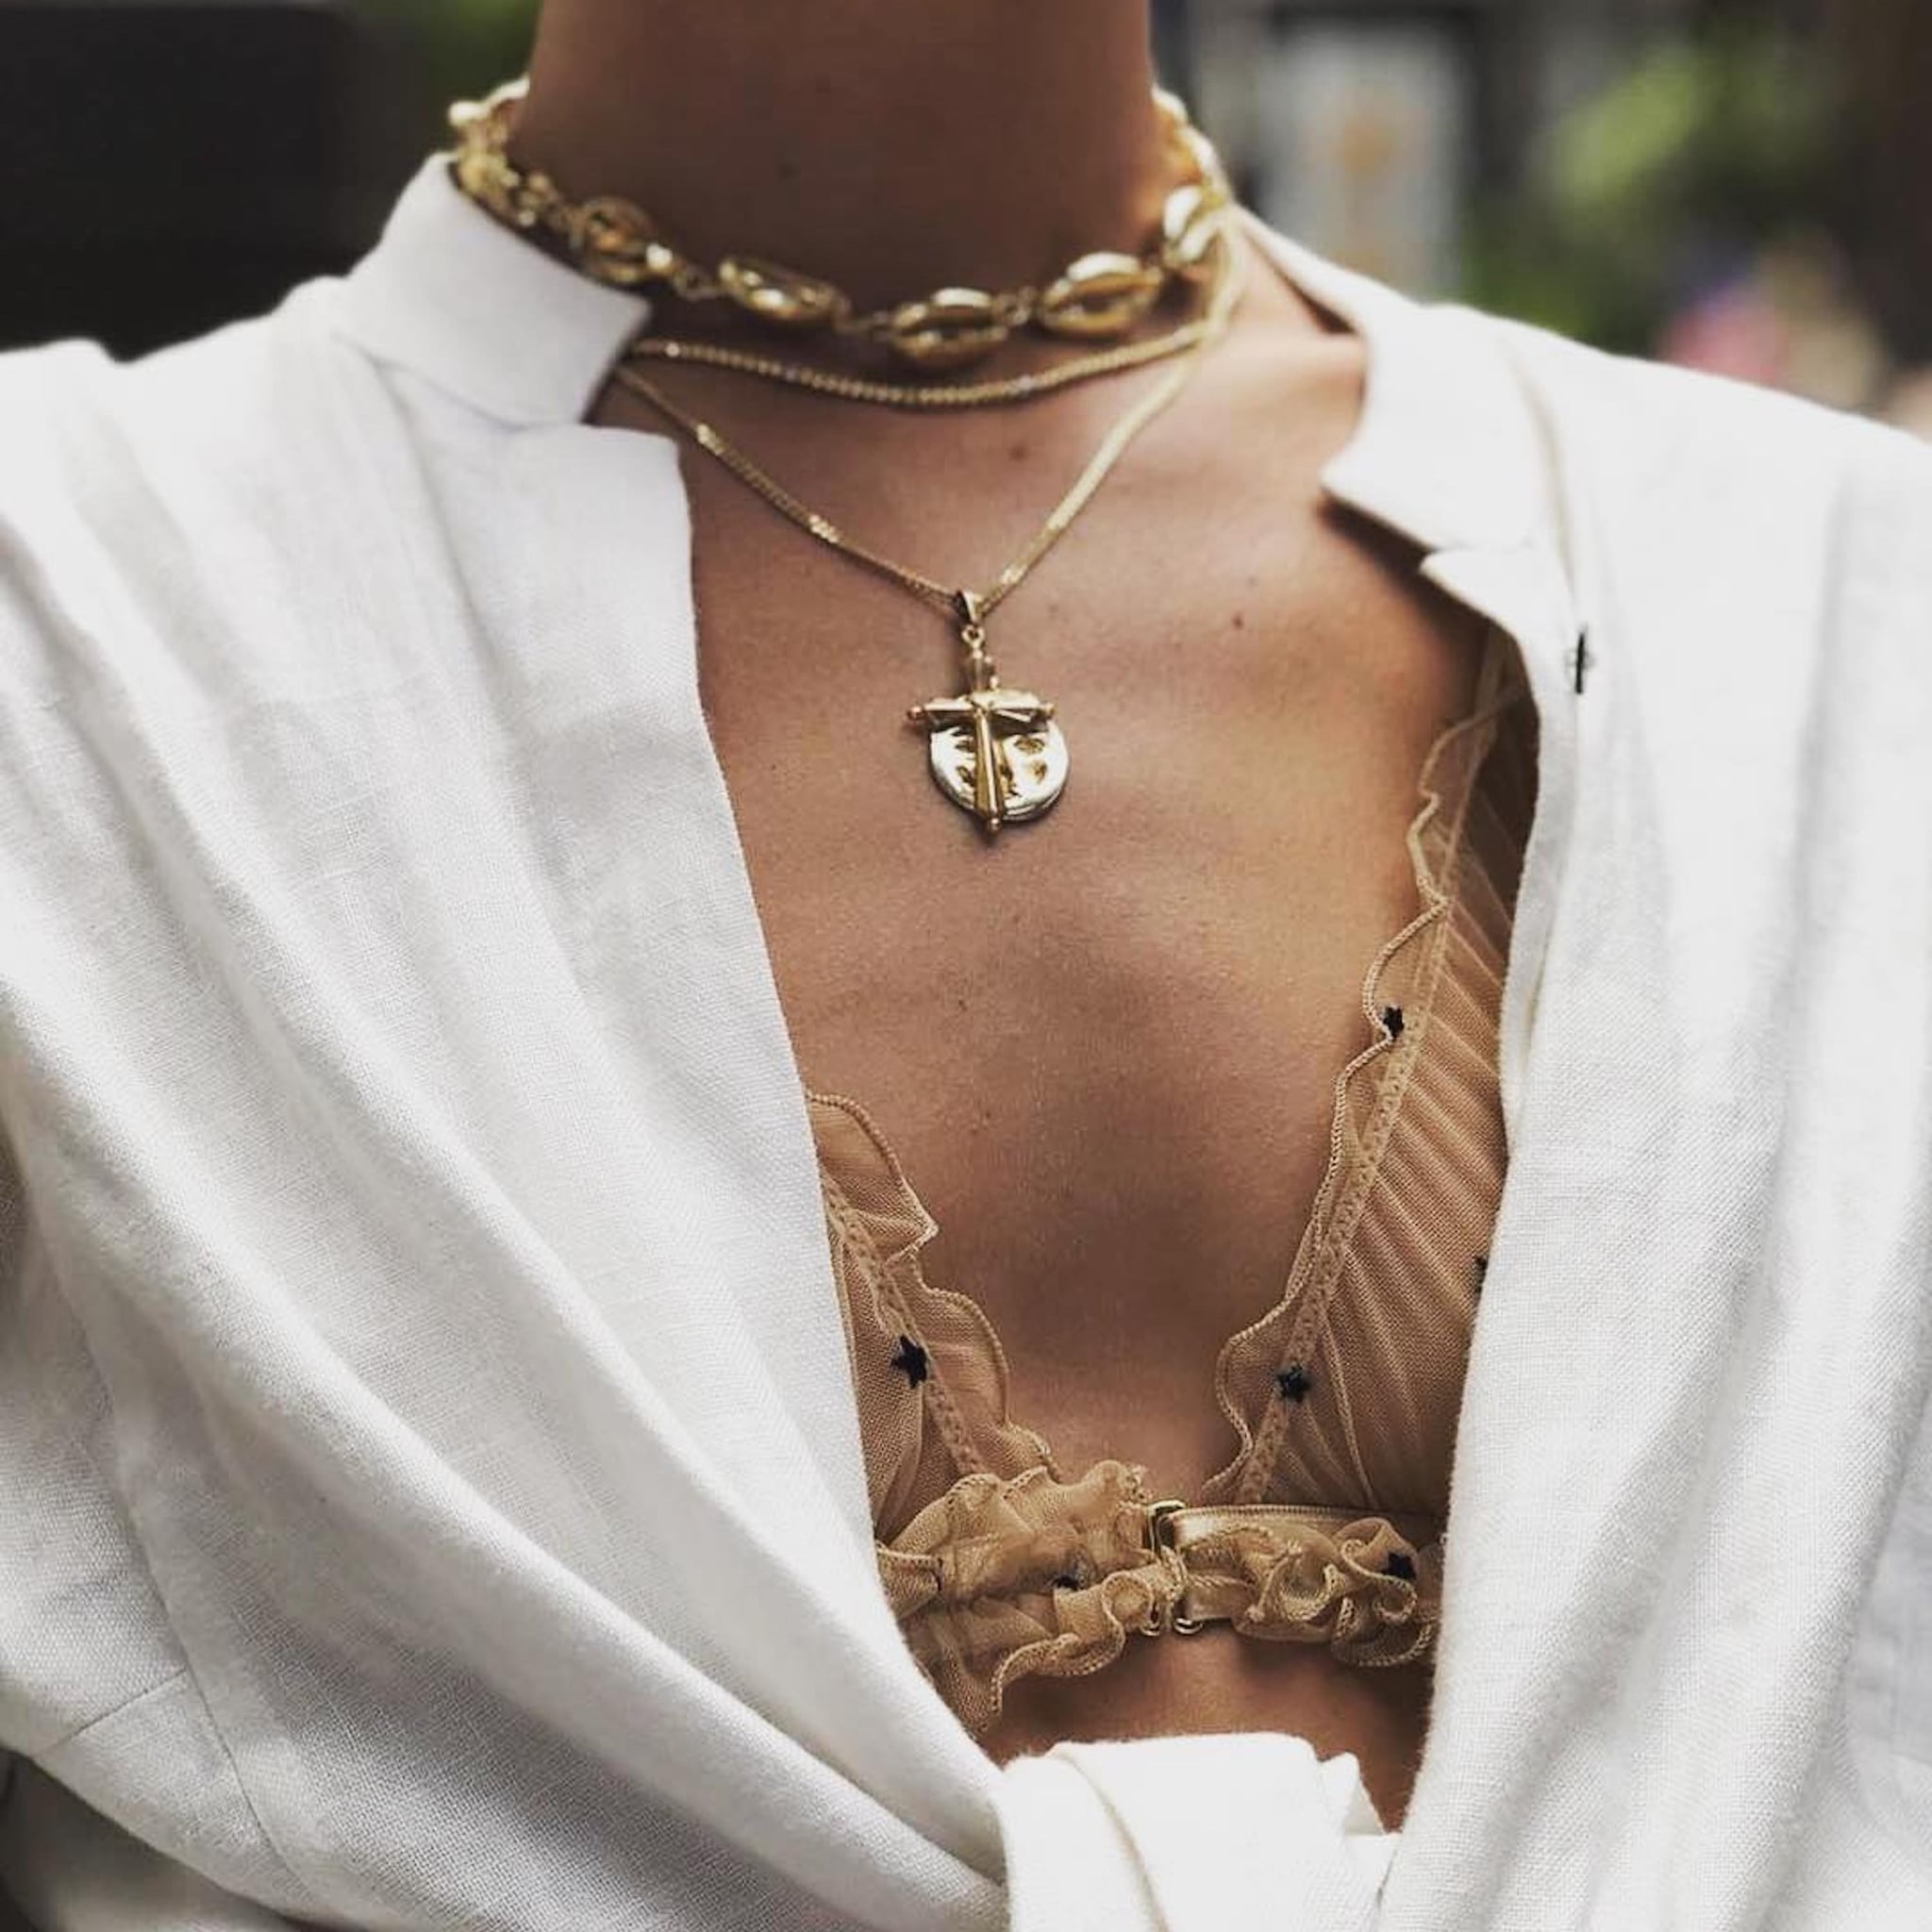 10 stylish ways to wear your bra on the outside